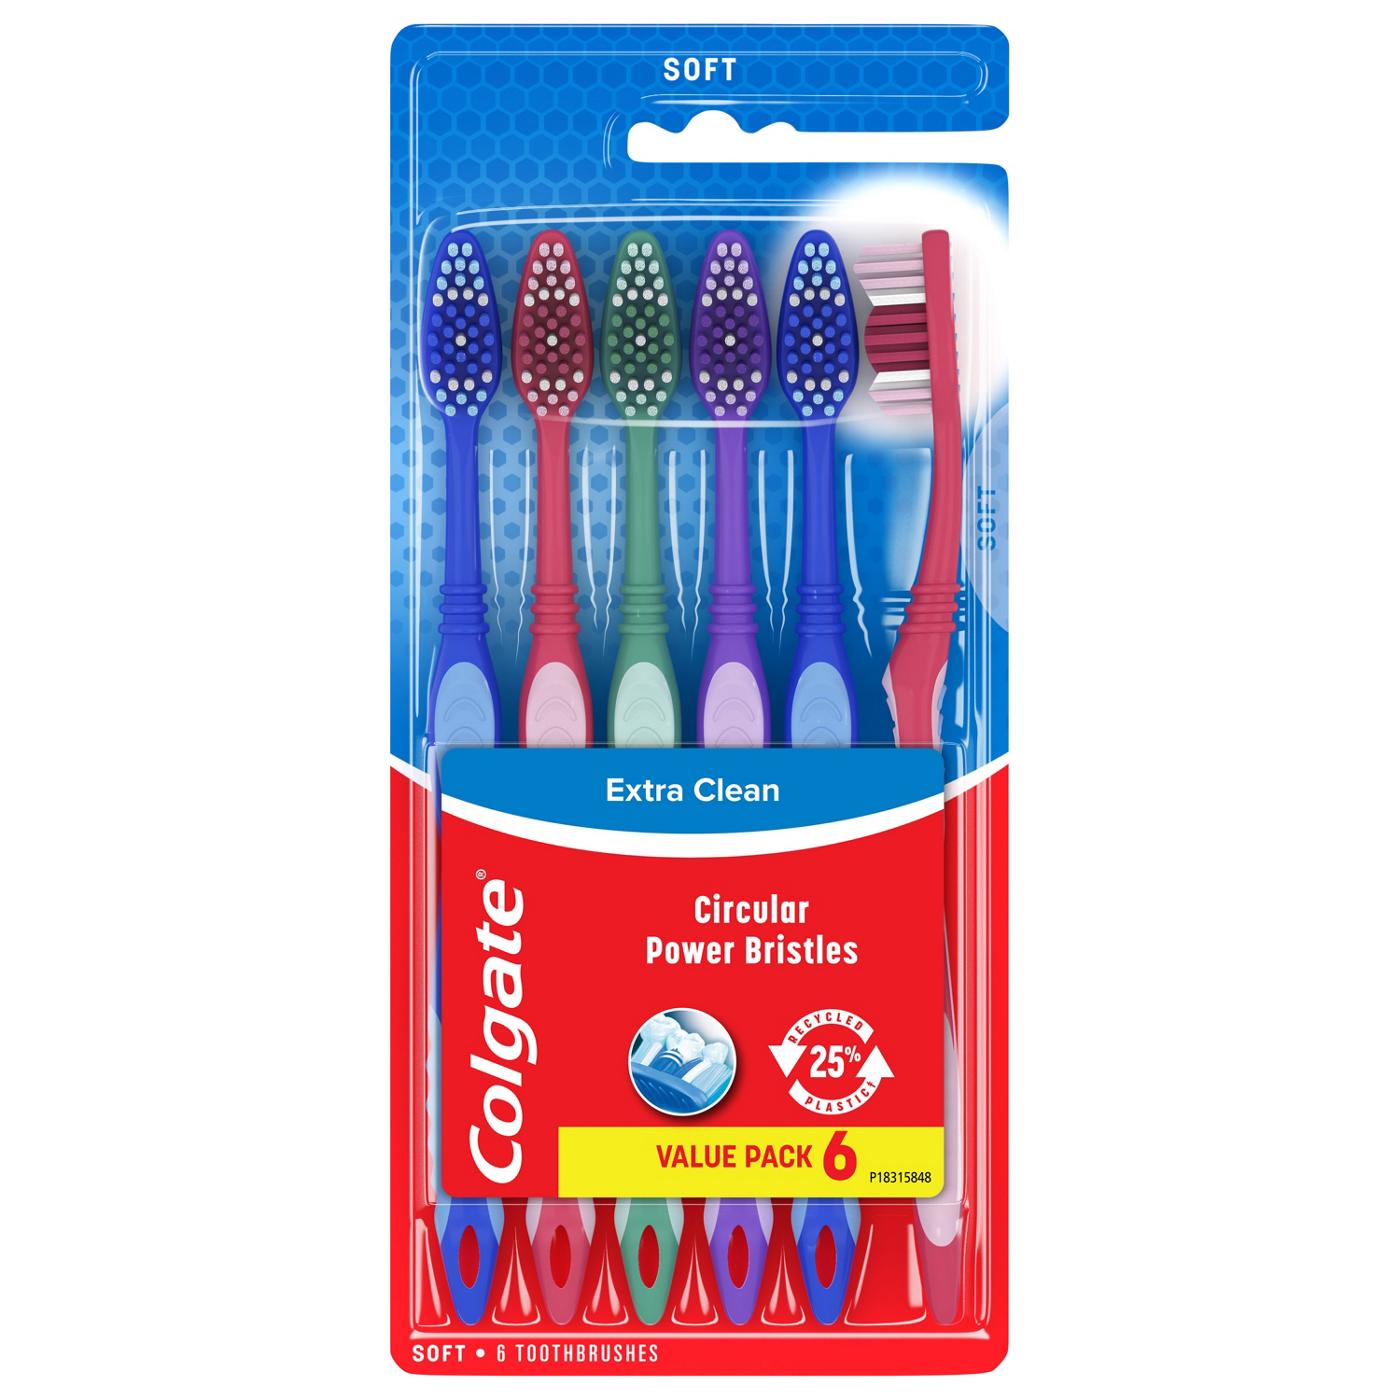 Colgate Extra Clean Toothbrushes - Soft; image 1 of 3